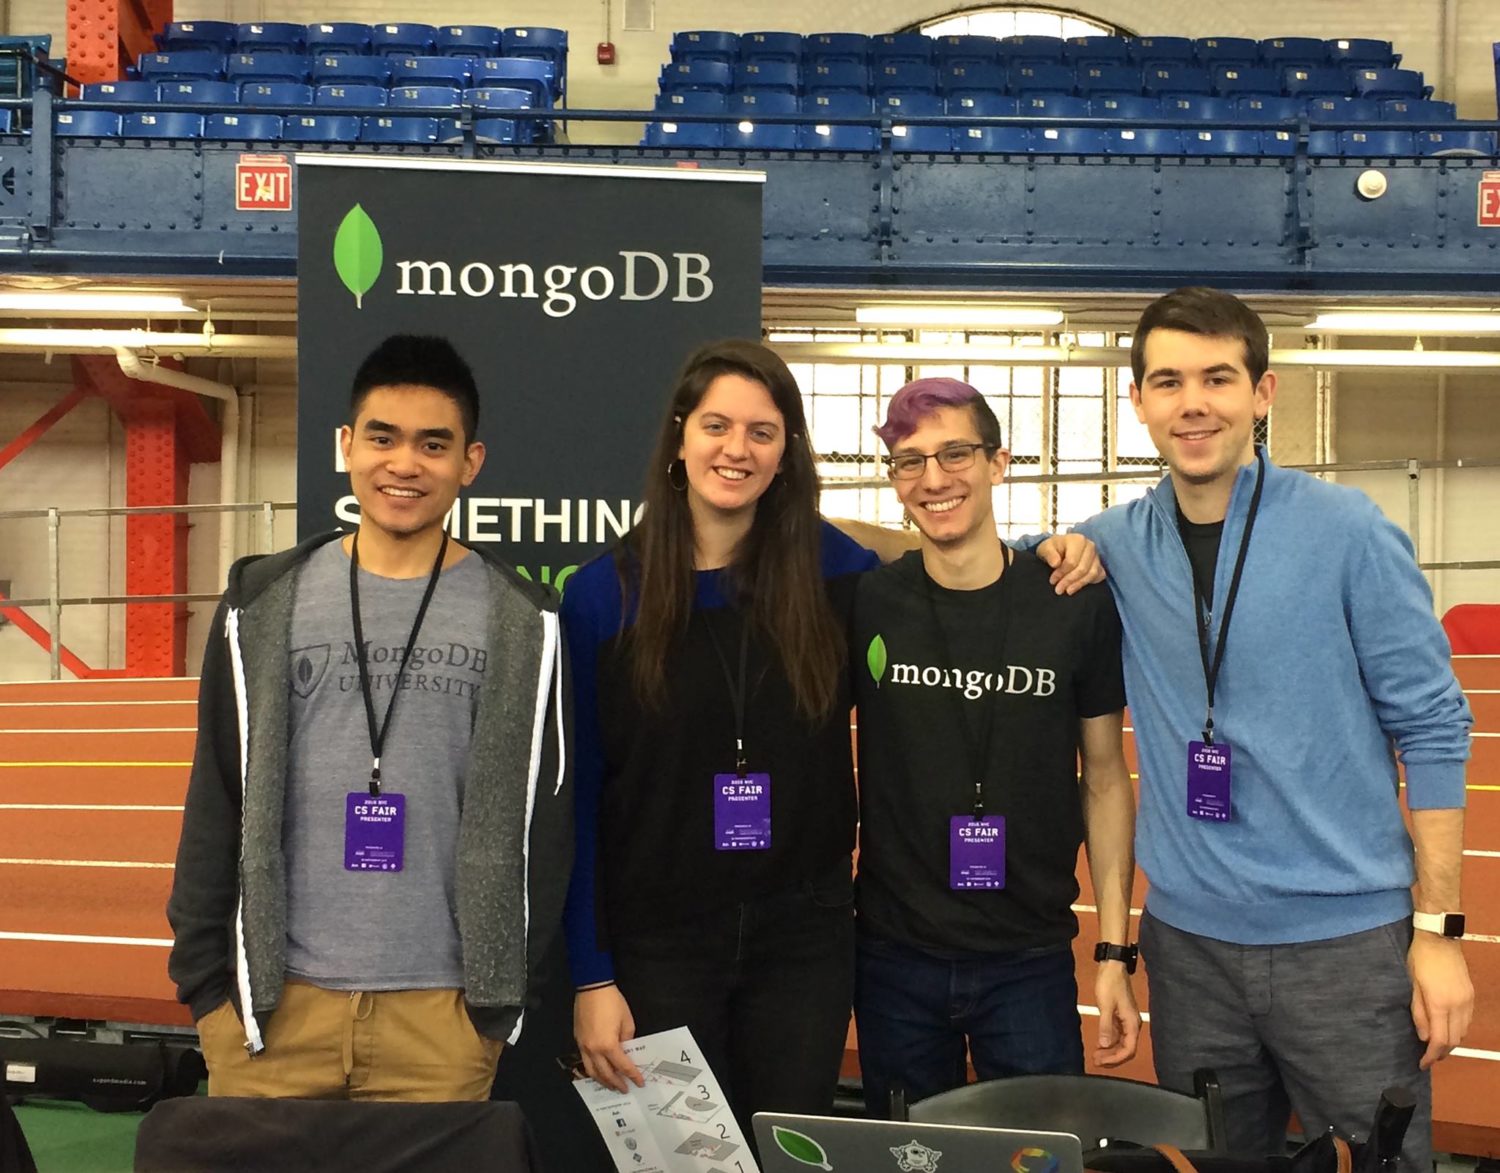 the team behind the successful startup mongoDB